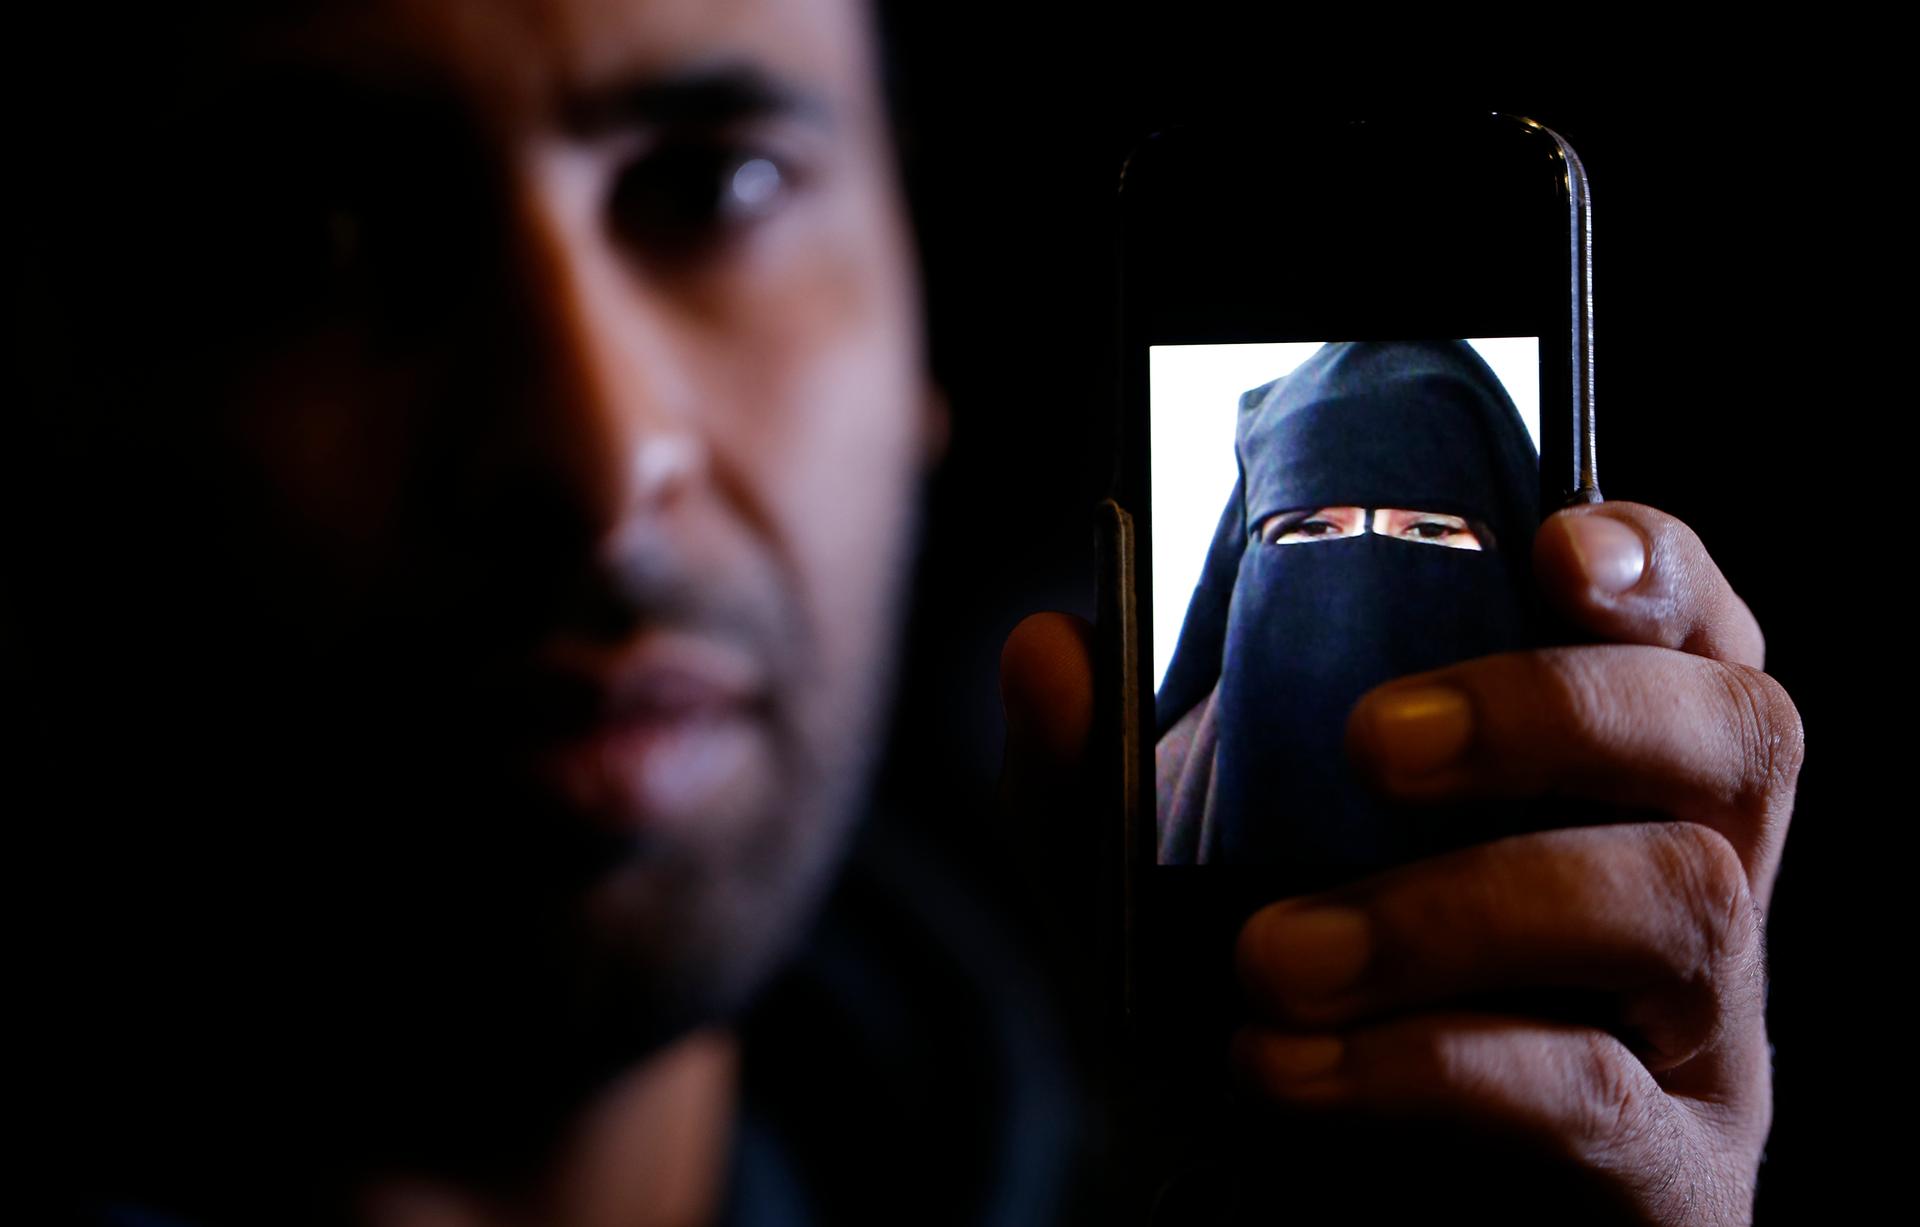 Foad, the brother of 15-year-old Nora, who left her home in Avignon for Syria nine months ago, shows a portrait he took last September, during an interview on October 6, 2014.